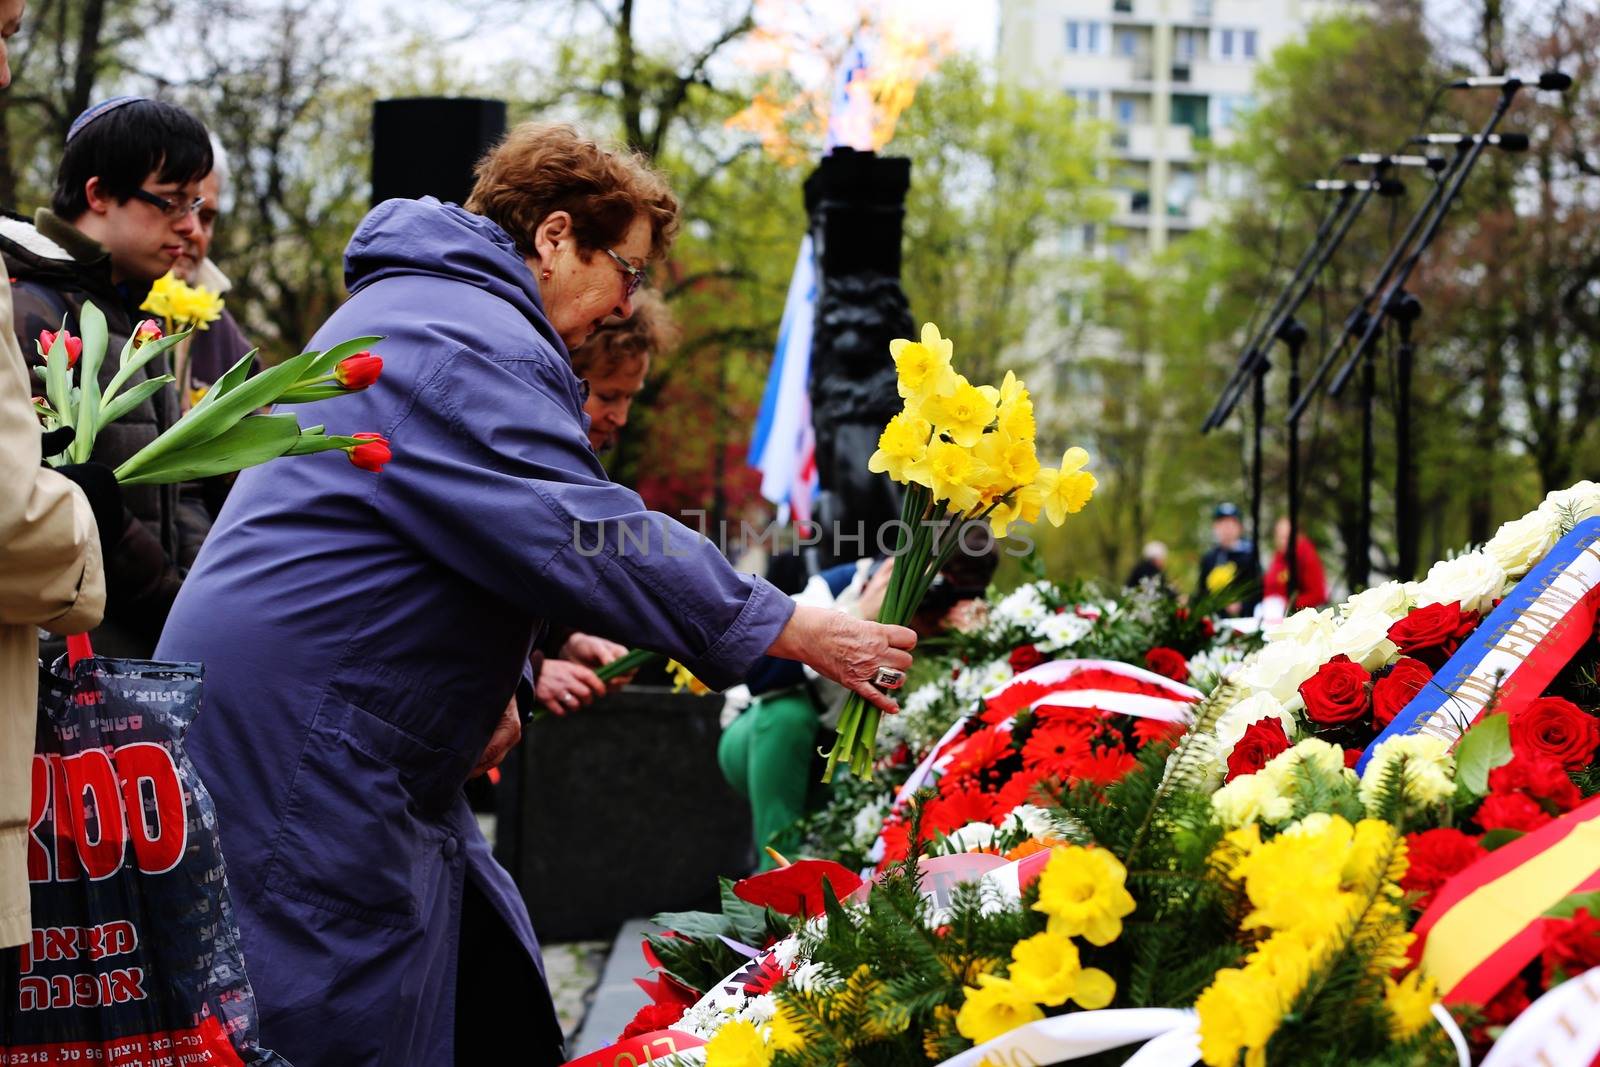 POLAND, Warsaw: People lay flowers at the Ghetto Heroes Monument in Warsaw, Poland on April 19, 2016, on the 73rd anniversary of the Warsaw Ghetto uprising.Members of the state and local governments, ambassadors, as well as those who are Righteous Among Nations attended the anniversary. The ceremony took place at the spot of the first armed clashes in 1943. The uprising started when Jewish residents of the ghetto refused surrender to the Nazi police commander. The entire ghetto was burned and the clashes ended on May 16. An estimated 13,000 people in the ghetto were killed in the revolt.